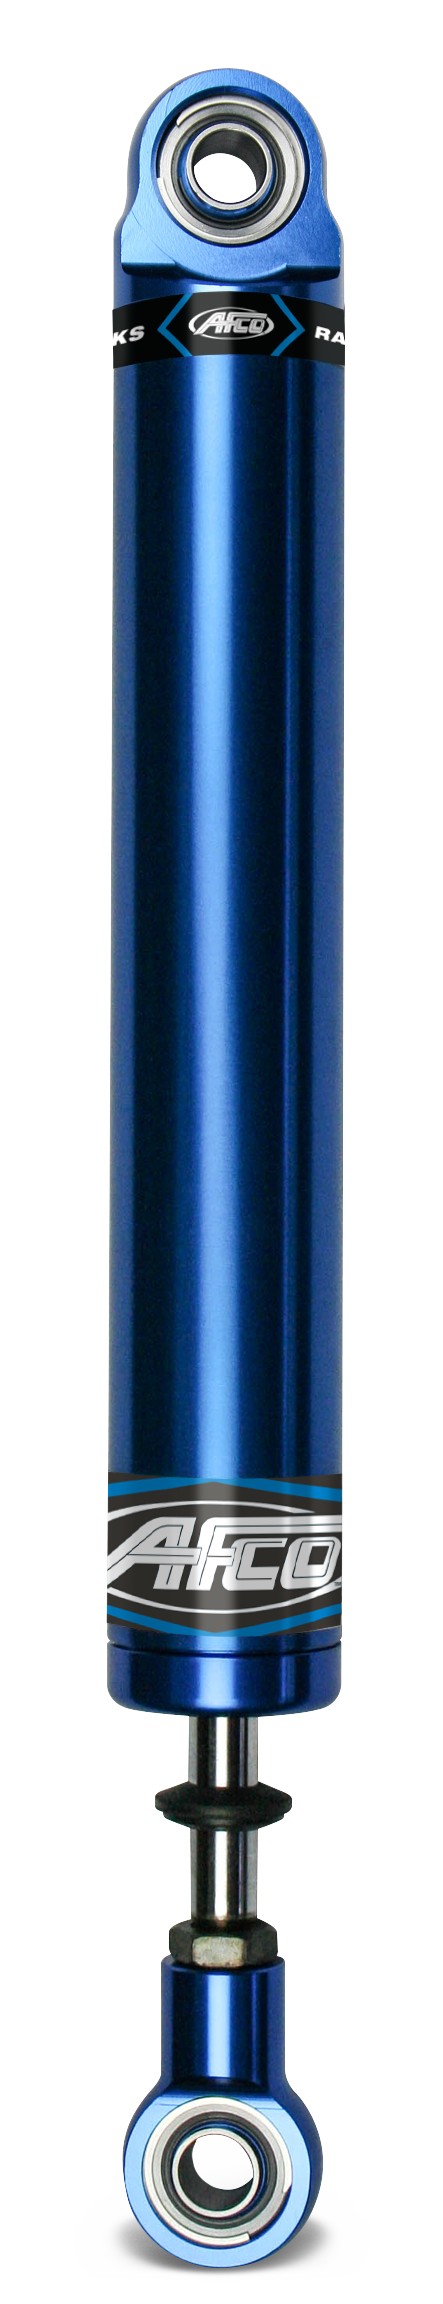 Aluminum Shock Twin Tube 16 Series Small Body 7 Inch Comp 2/Reb 5 Smooth